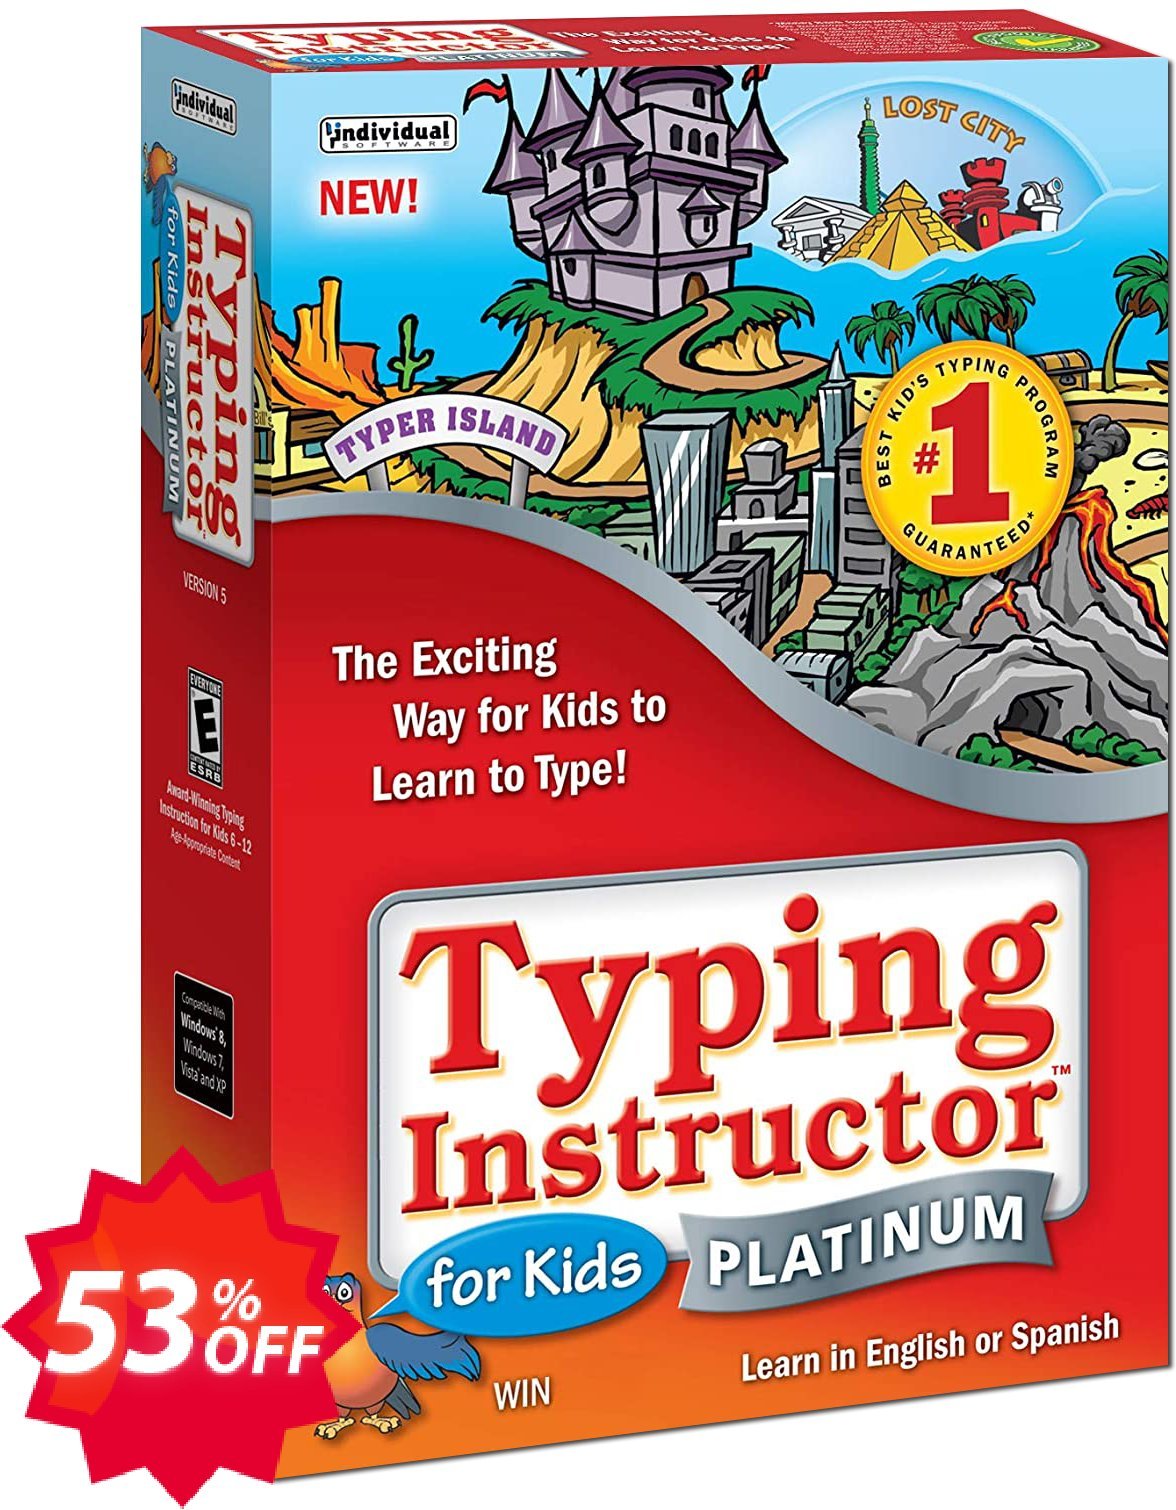 Typing Instructor for Kids Platinum Upgrade Coupon code 53% discount 